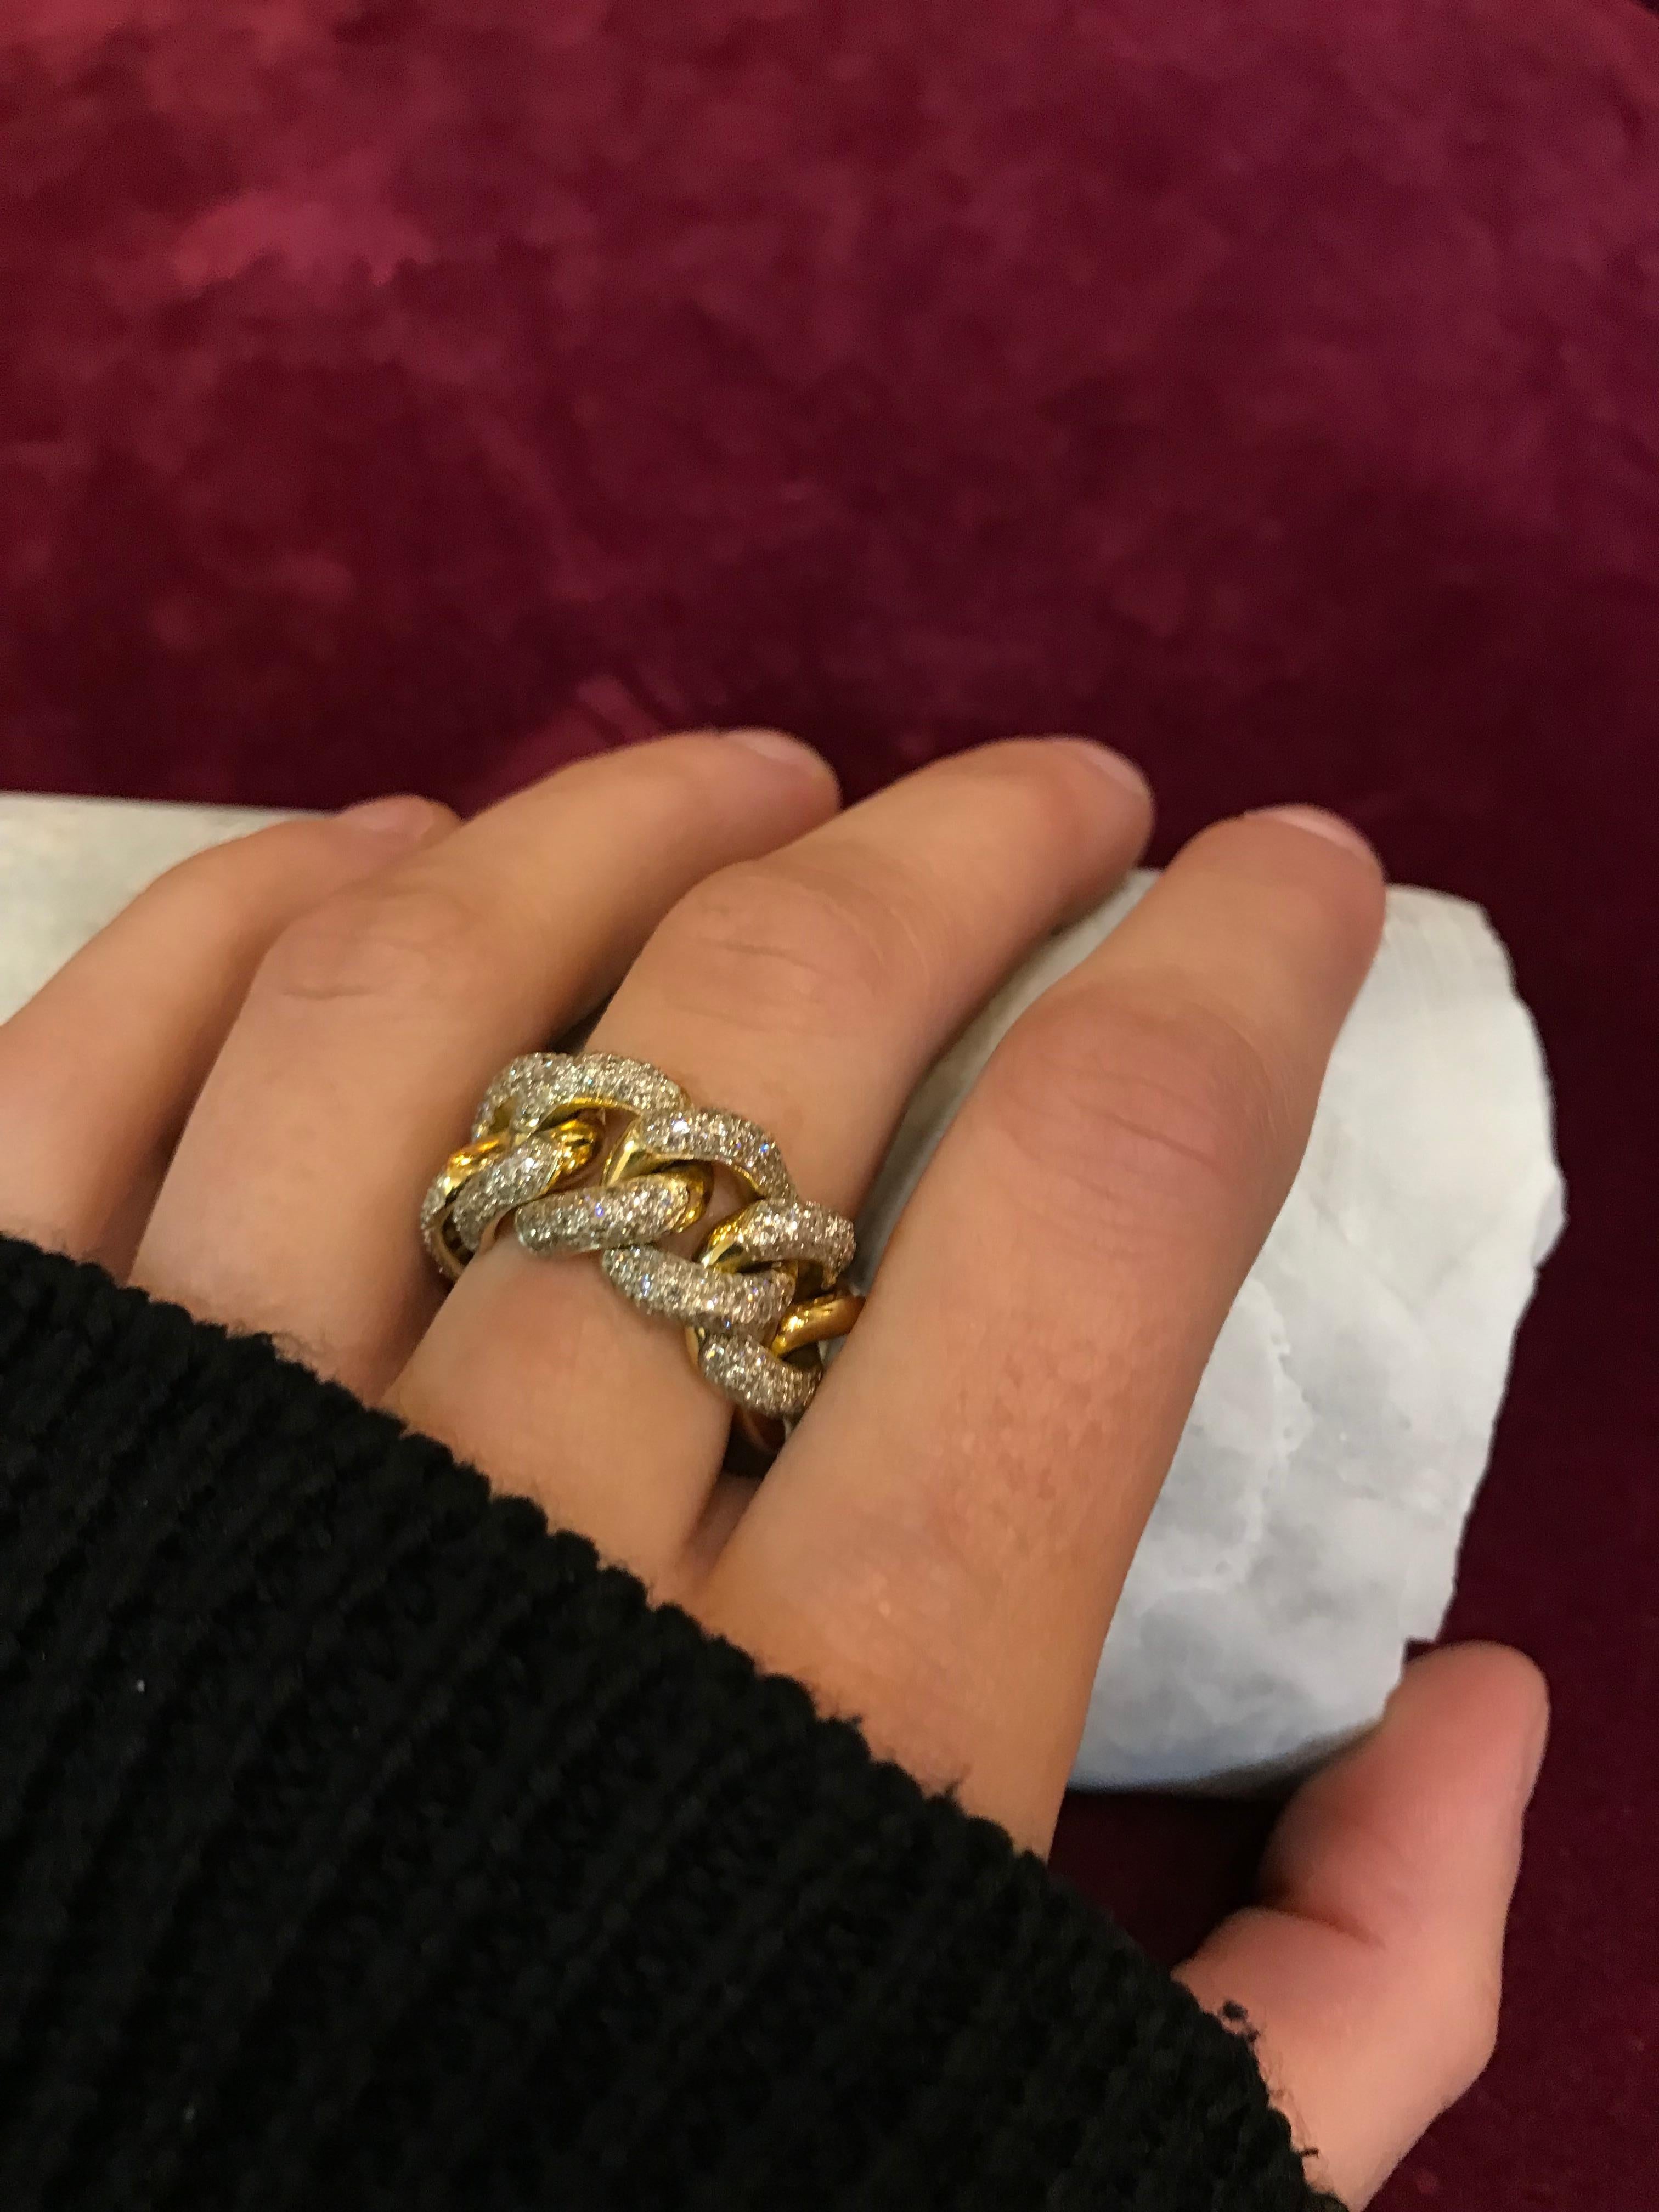 190 White VS F-G Diamonds (1.25ct)
13.40g Yellow Gold
The ring size is US size 7 but we are able to re-create one to suit your hand. Also listed in the photo are variations of colours and we would be delighted to discuss these options if you so